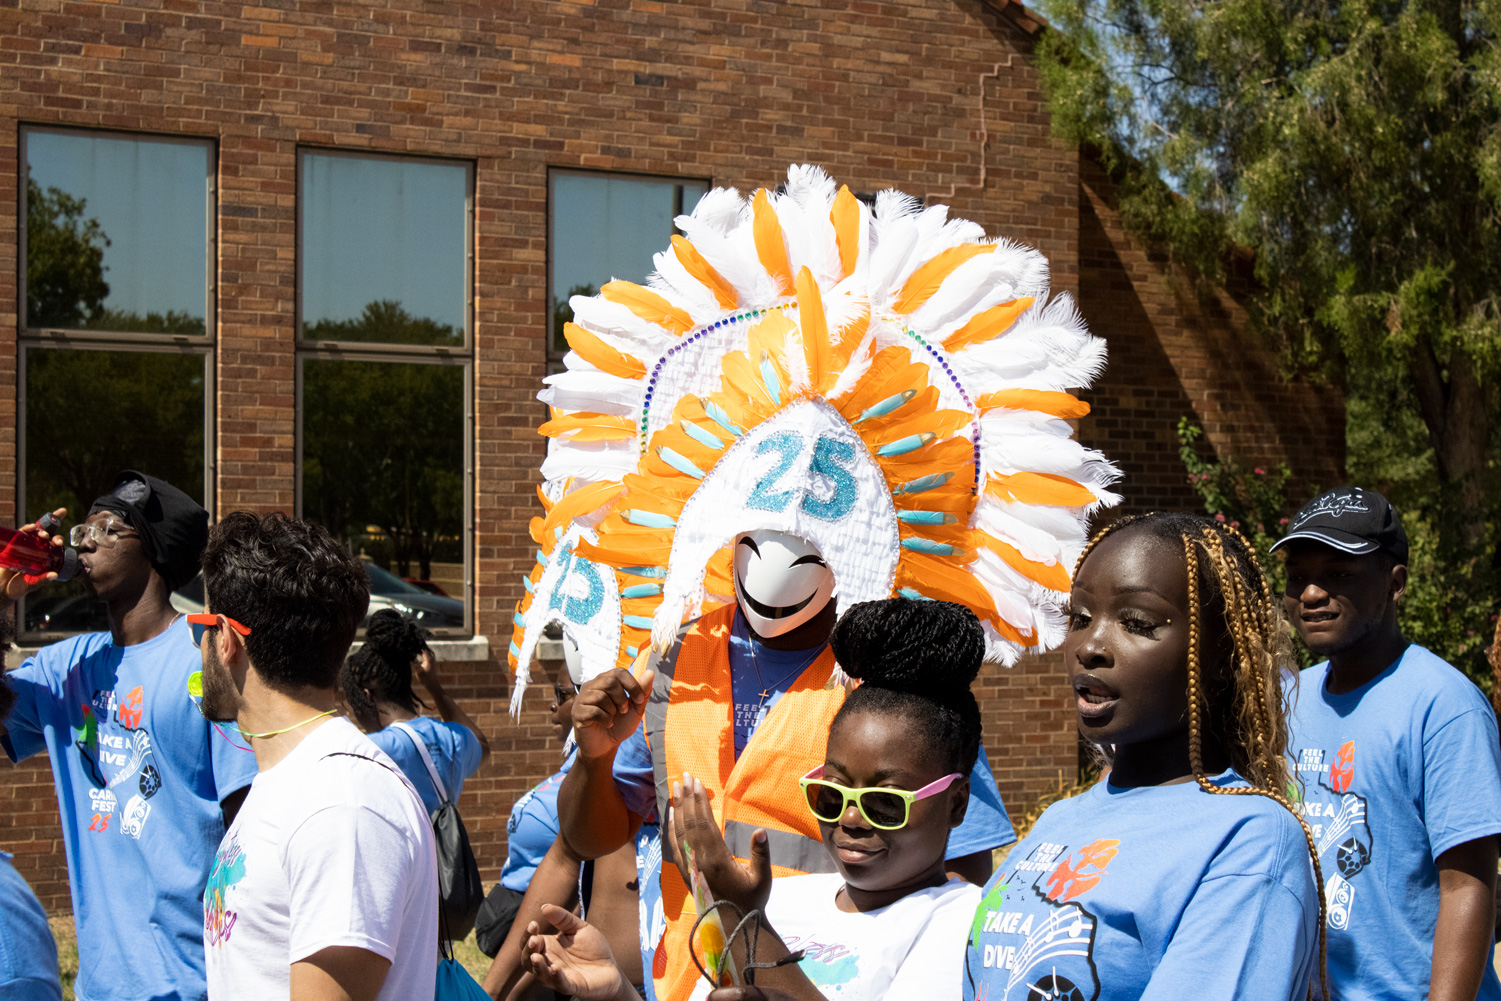 The Caribbean Student Organization celebrates its 25th anniversary with a festive parade, Sept. 23.